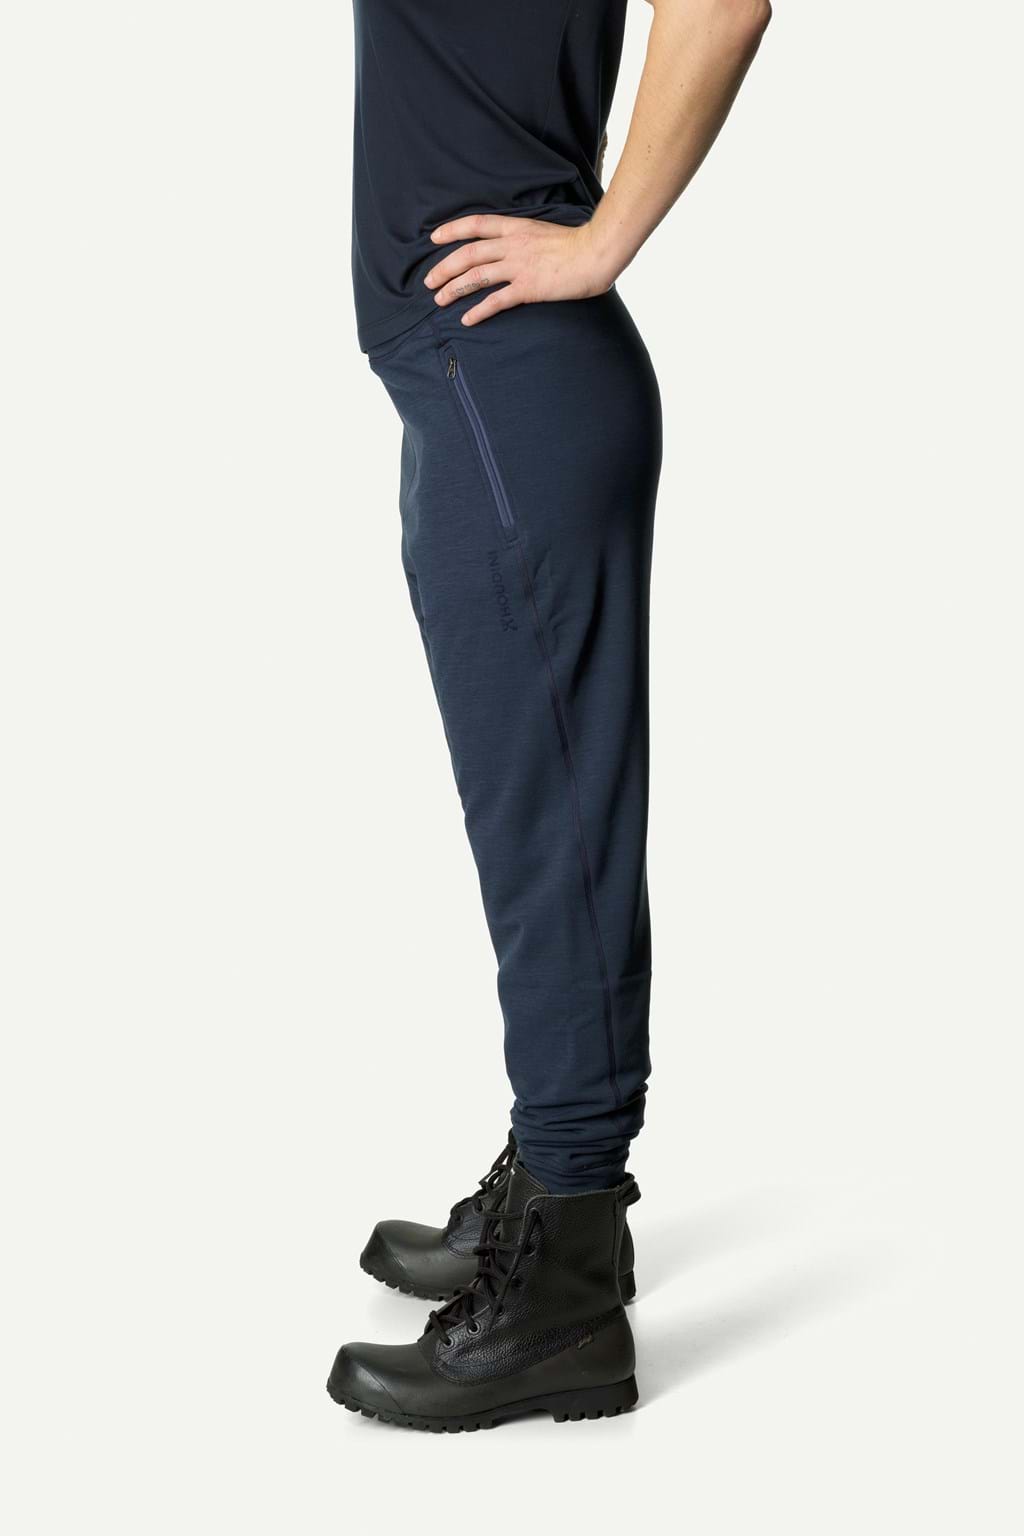 Women's Outright Pants